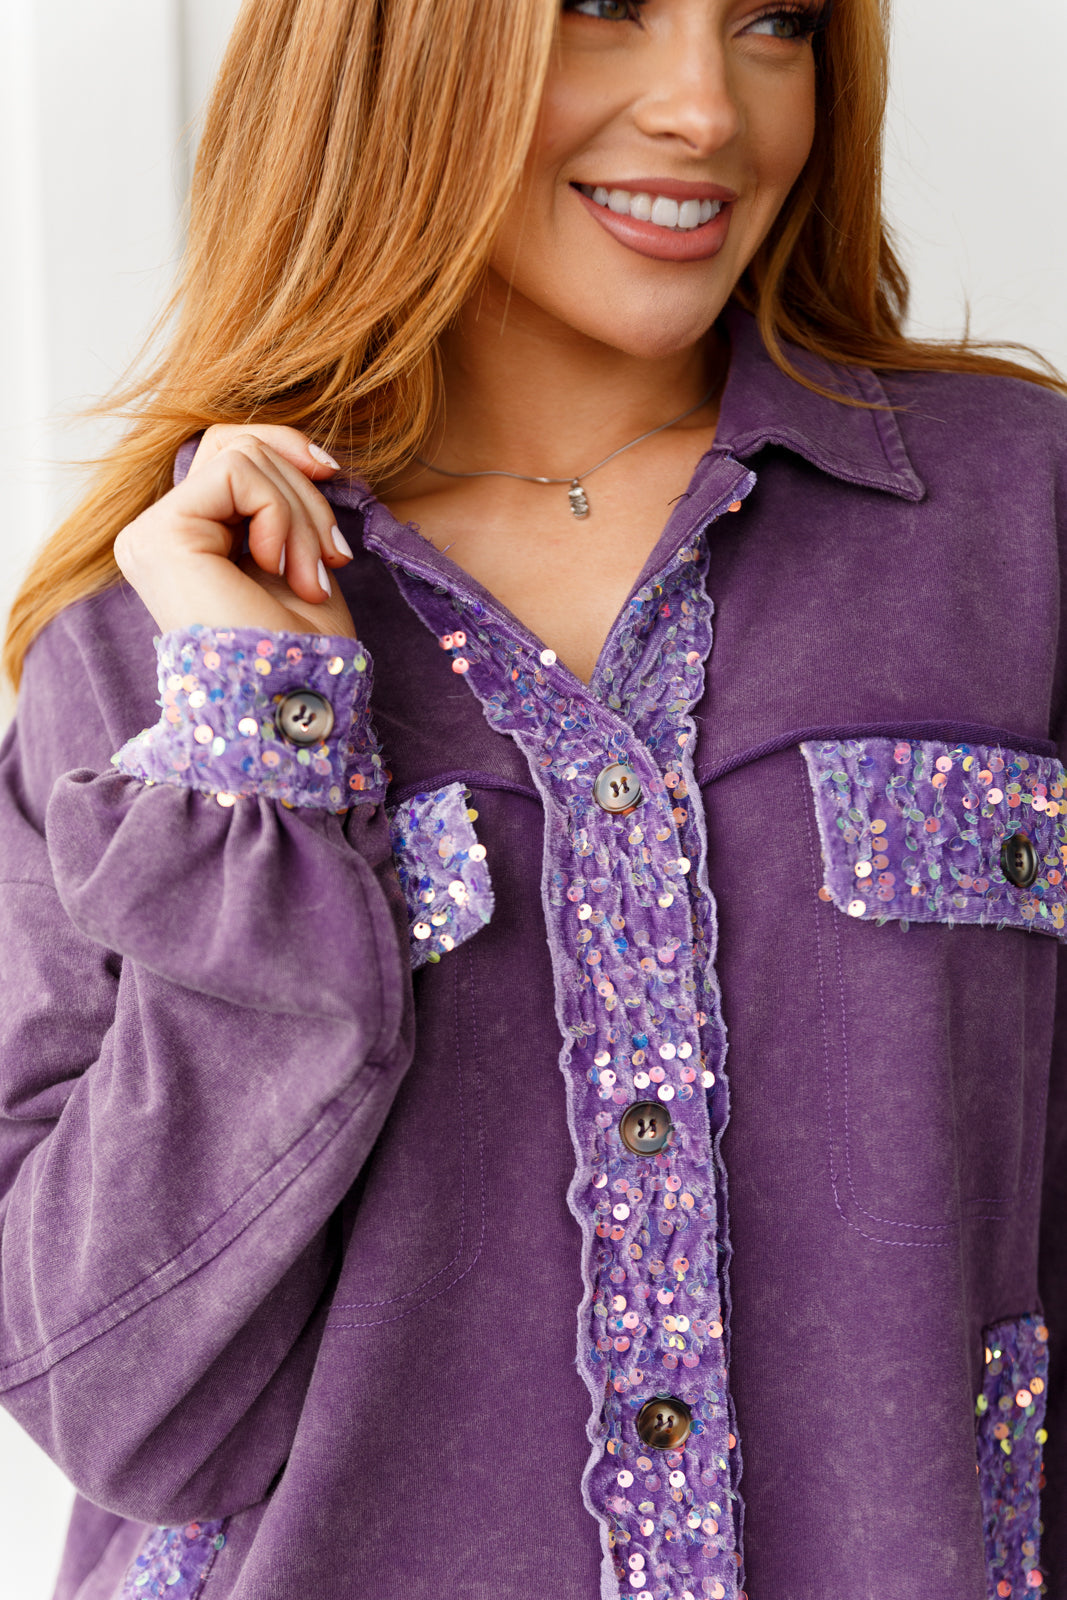 Chaos of Sequins Shacket in Purple Womens Southern Soul Collectives